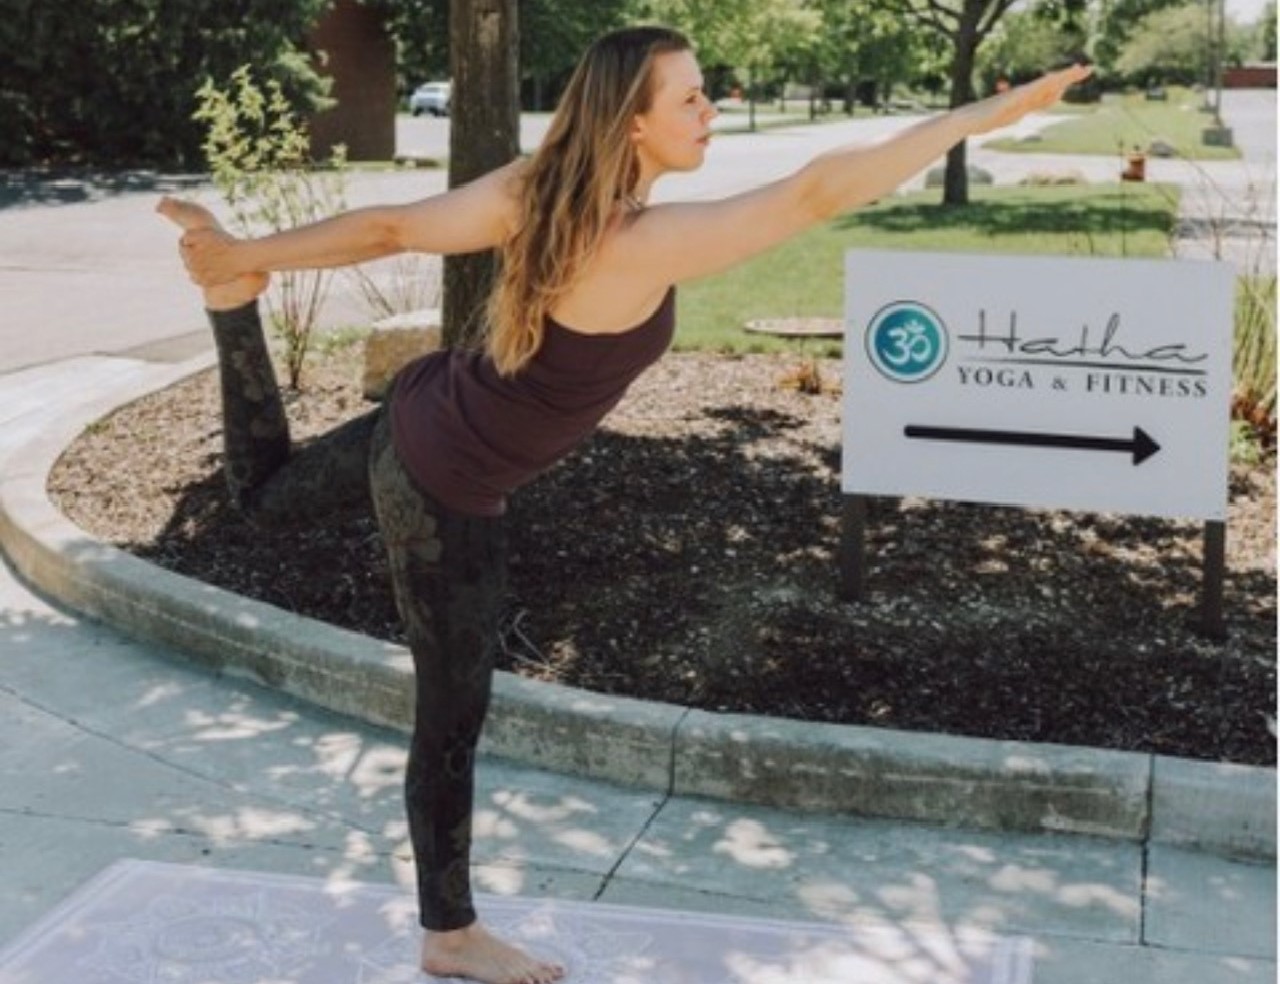 A white woman with long blonde hair is standing in a yoga pose with one arm outstretched in and the other holding her foot. She is standing on one leg on a yoga mat on an outdoor path.